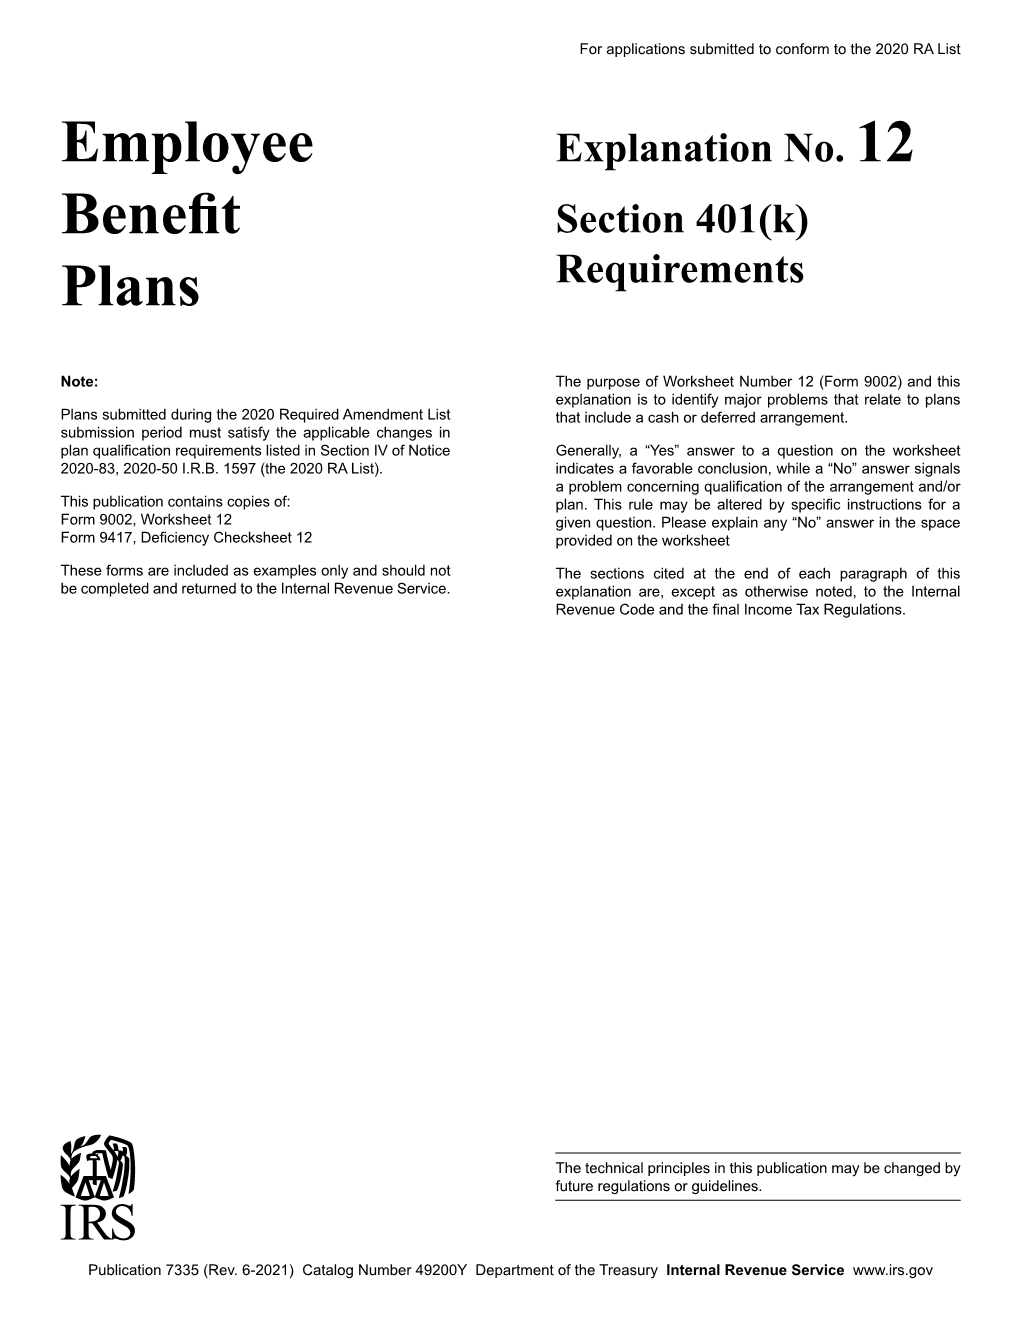 Section 401(K) Requirements